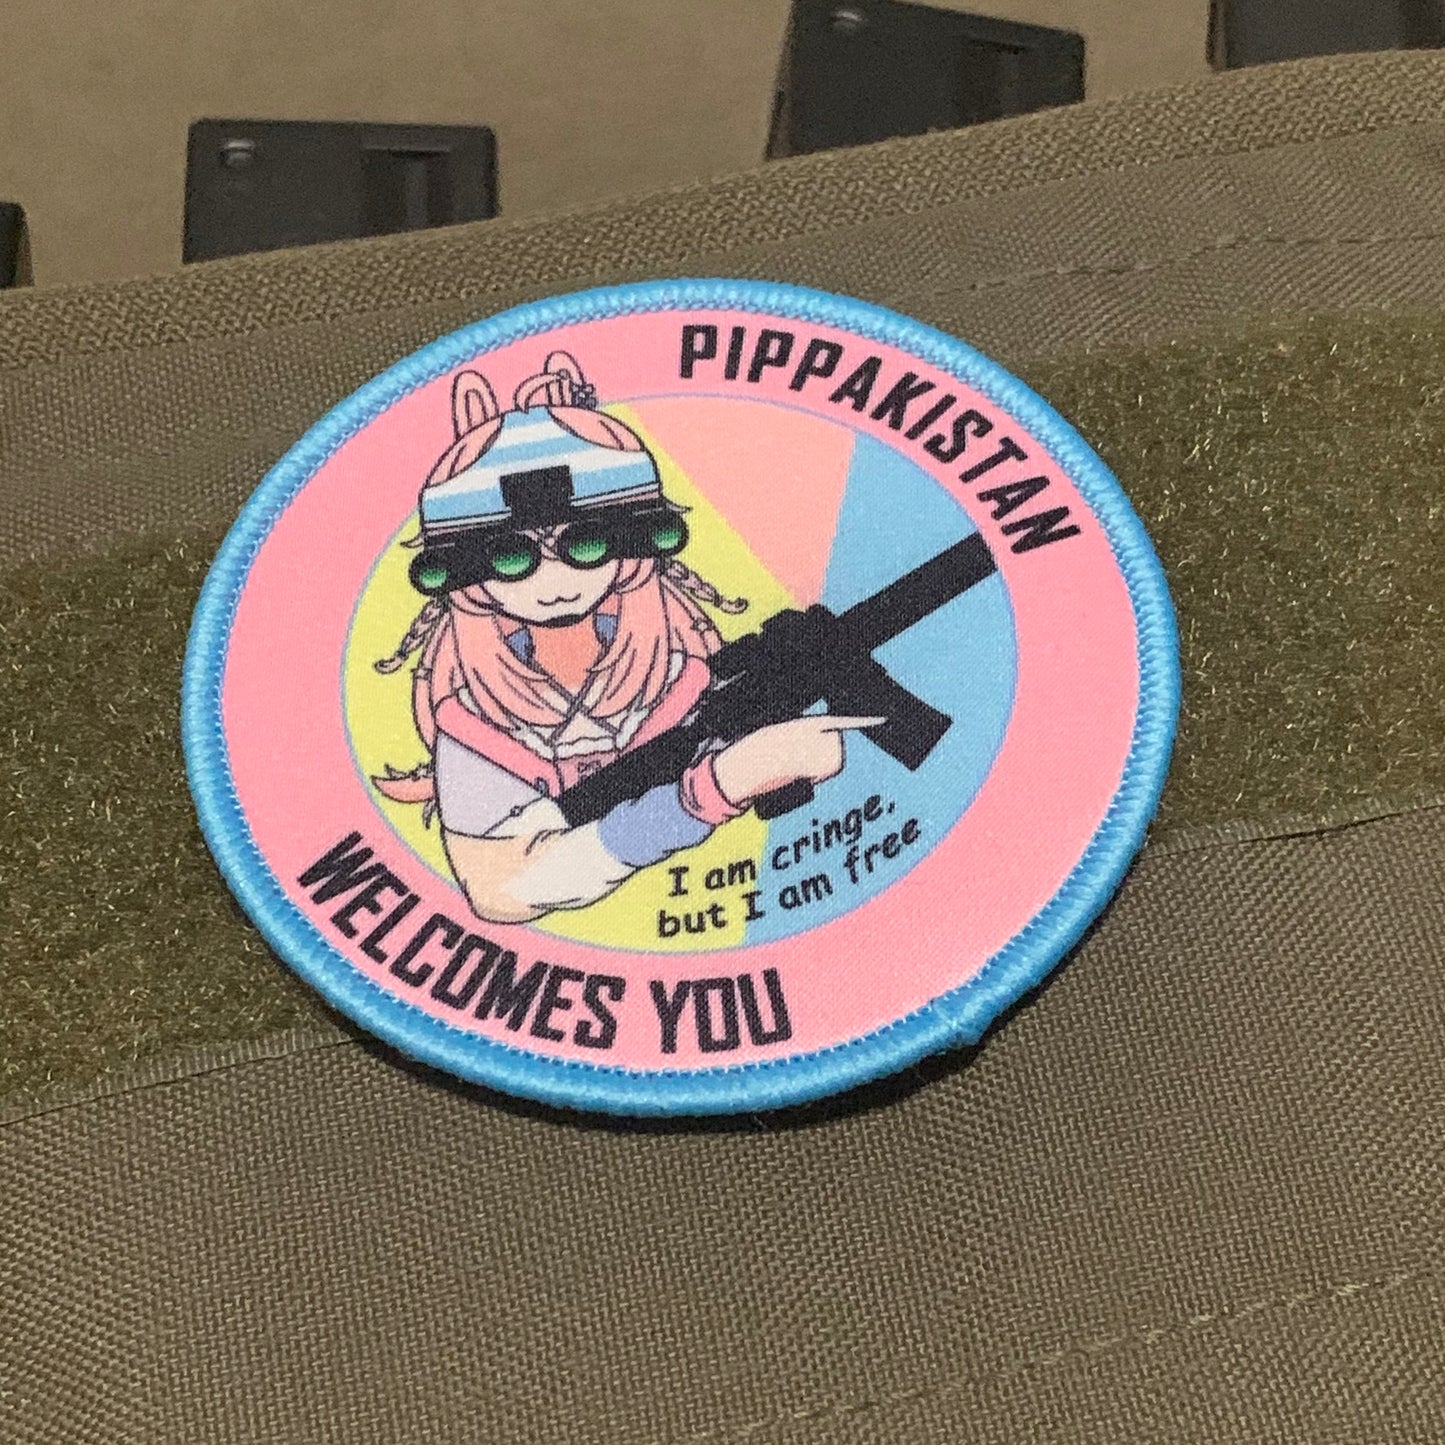 Pipkin Pippa Pippakistan Welcomes You Phase Connect Patch or Sticker